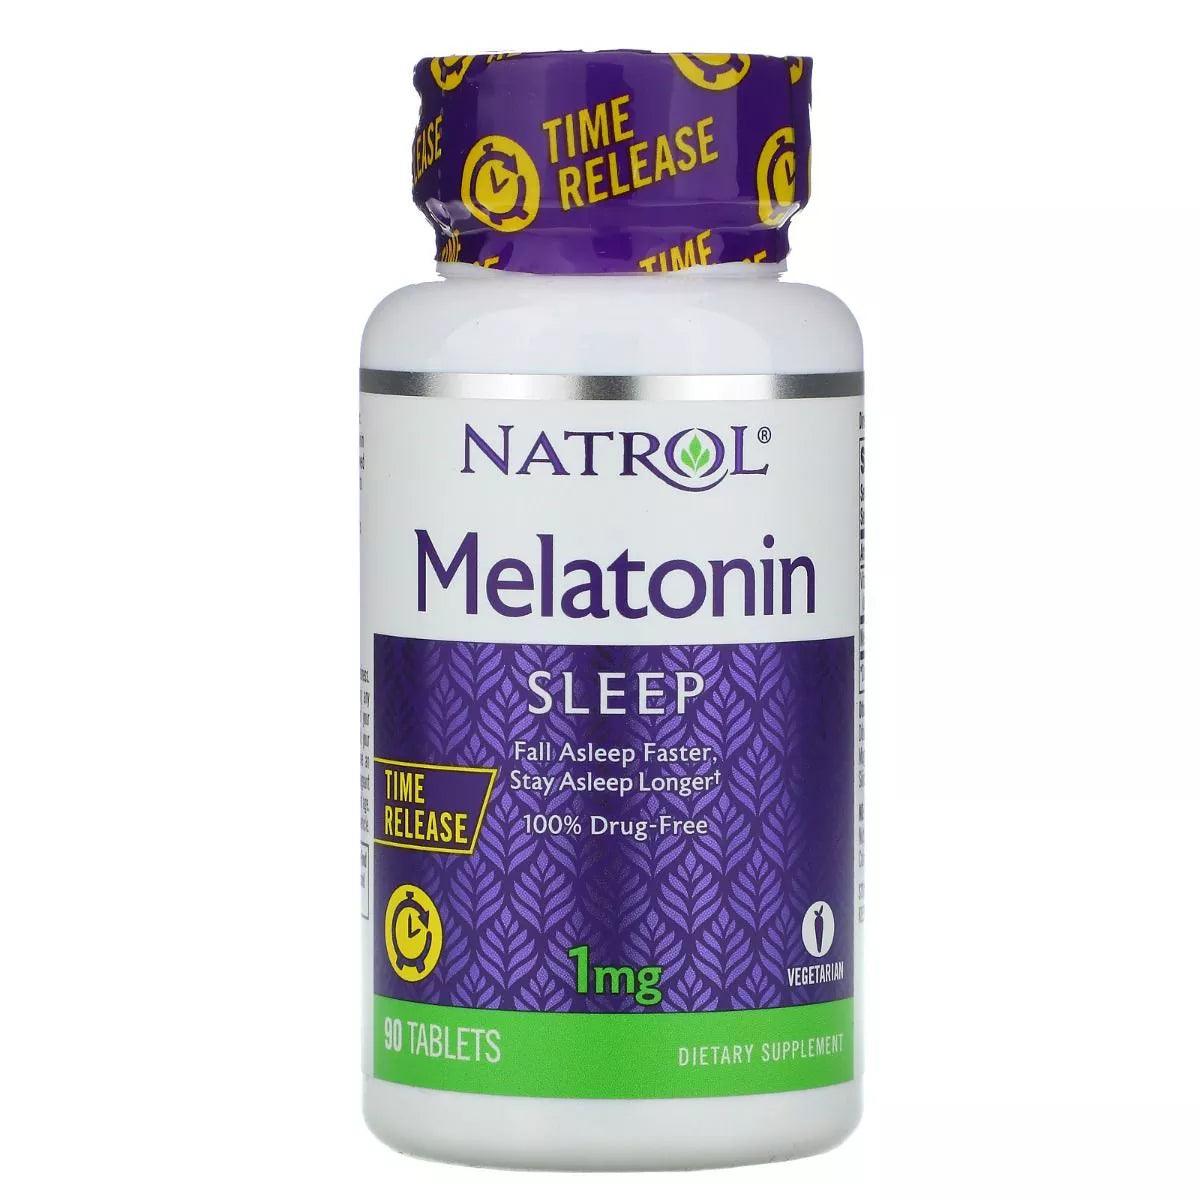 Time Release 1mg Sleep Support 90 Tabletten - Supplement Support